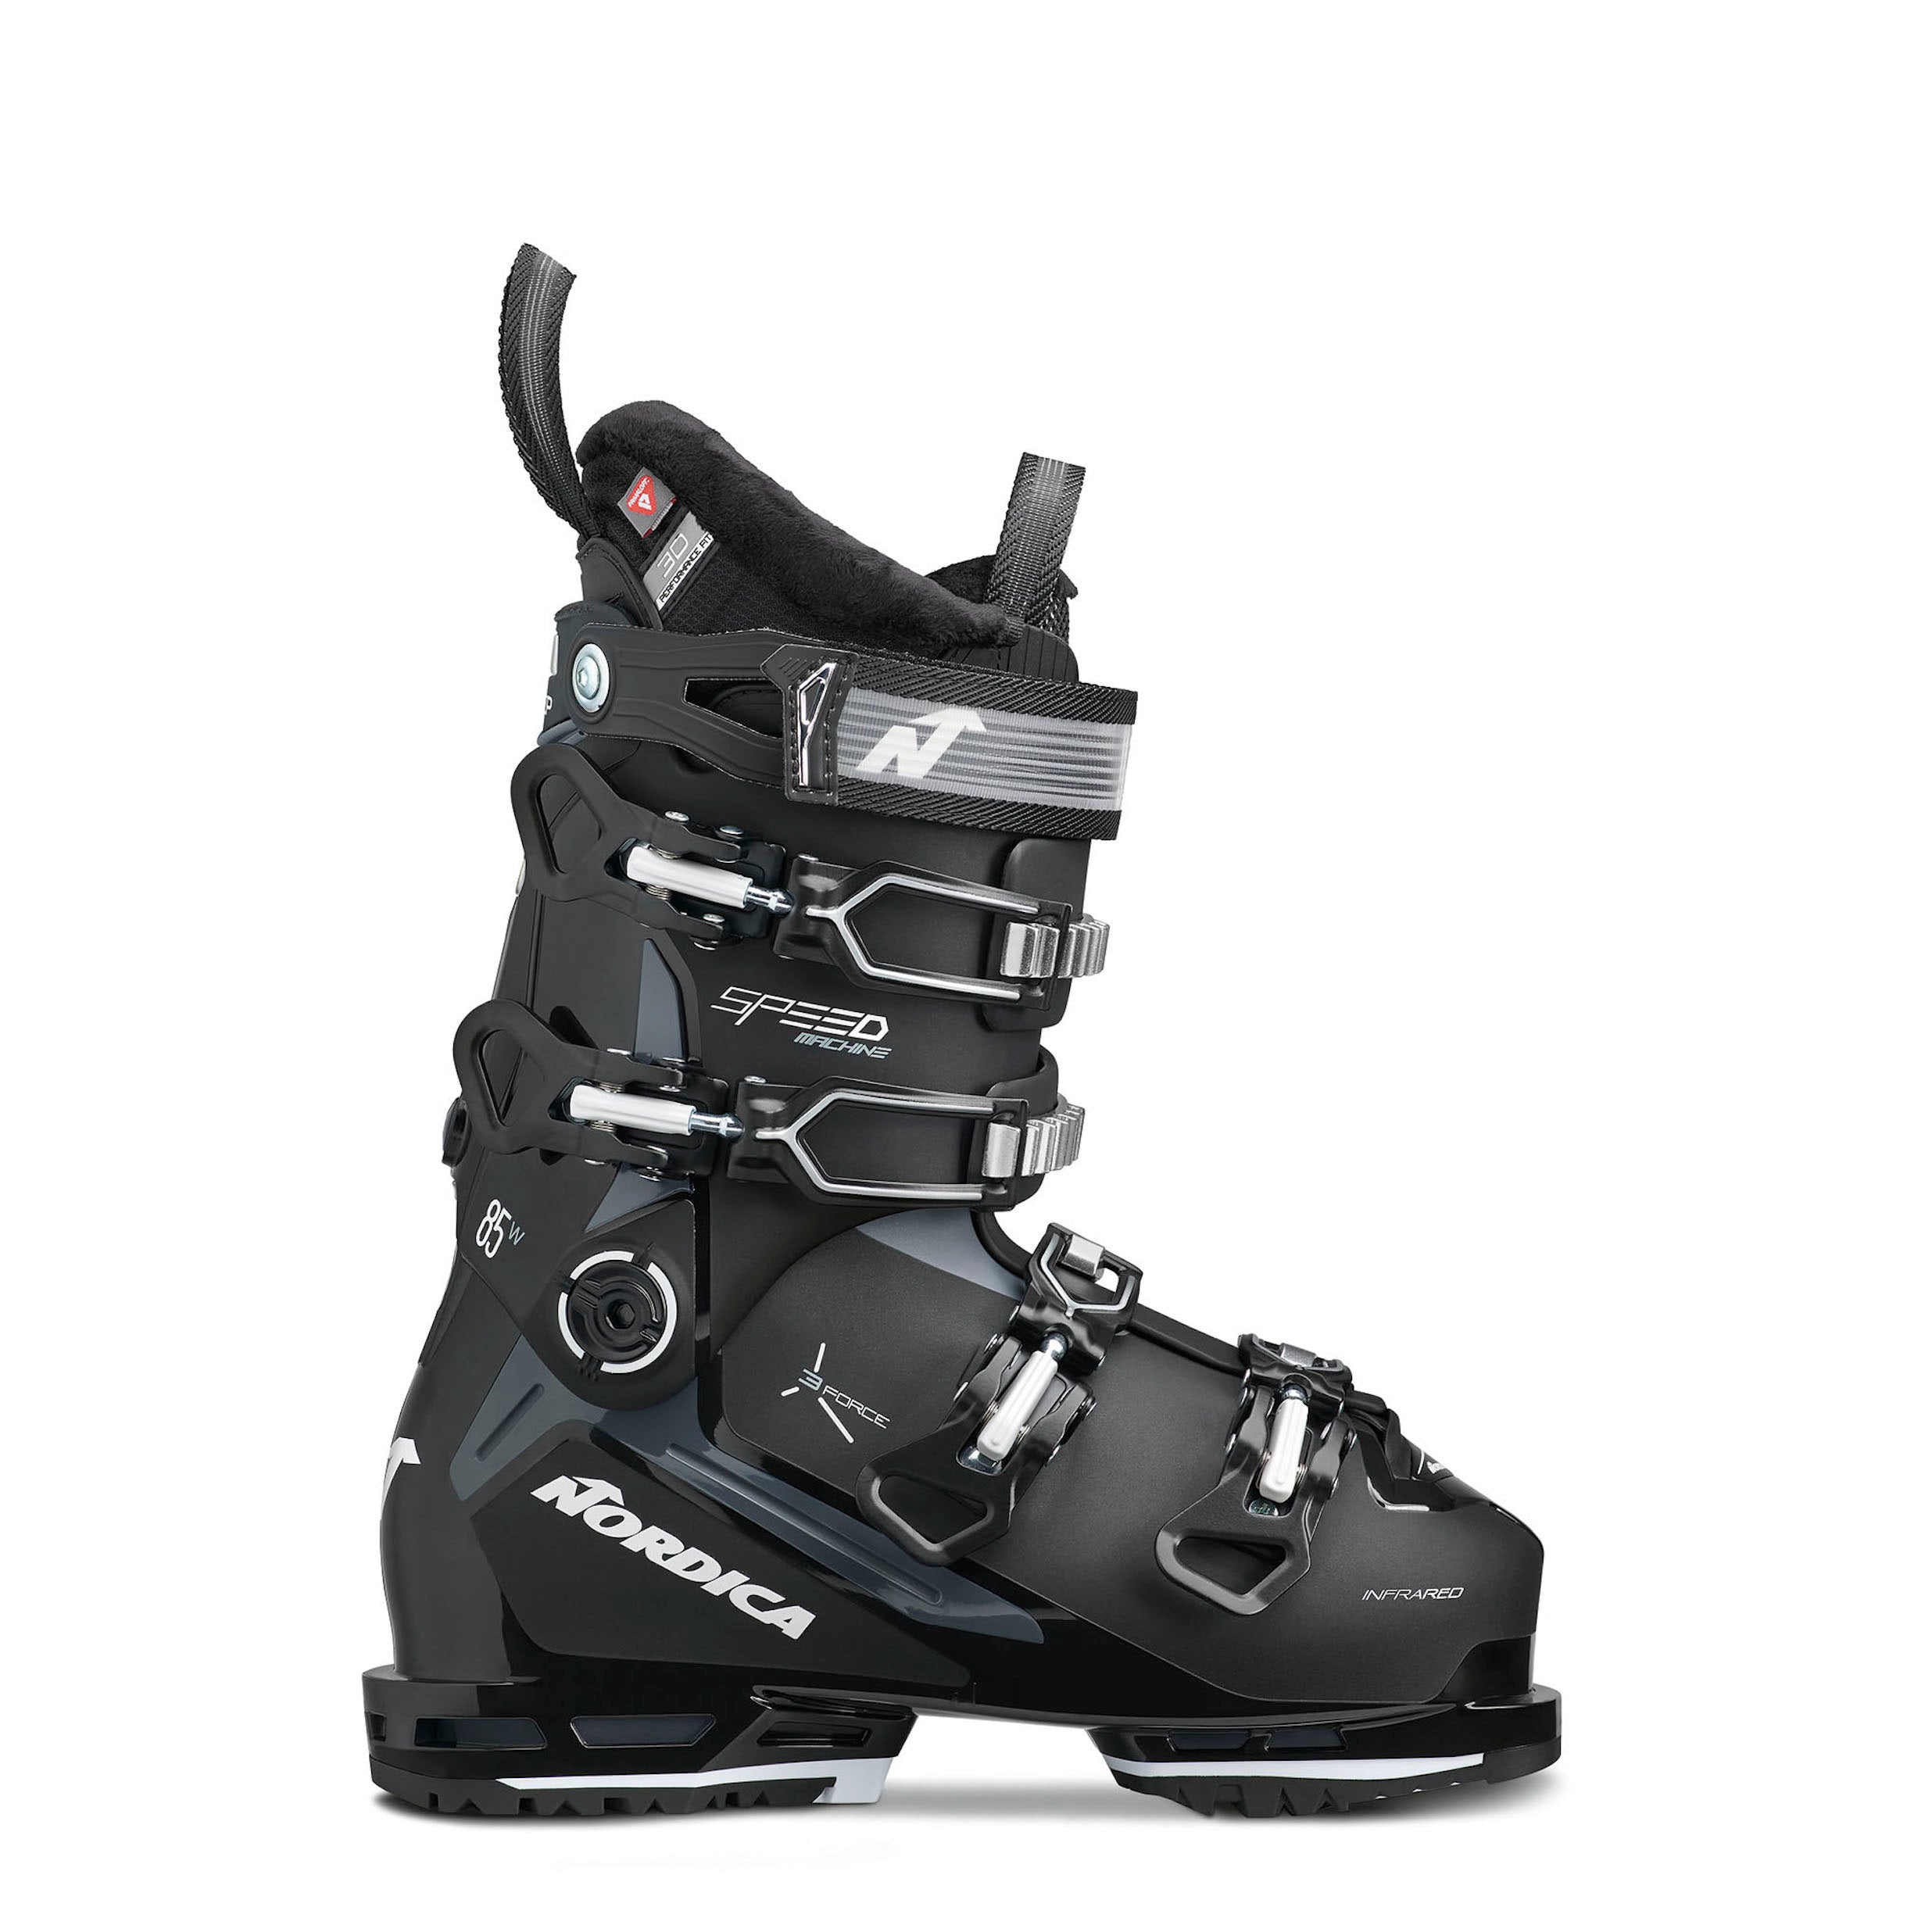 Women's Nordica Speedmachine 3 85 ski boot in black with silver and grey accents.